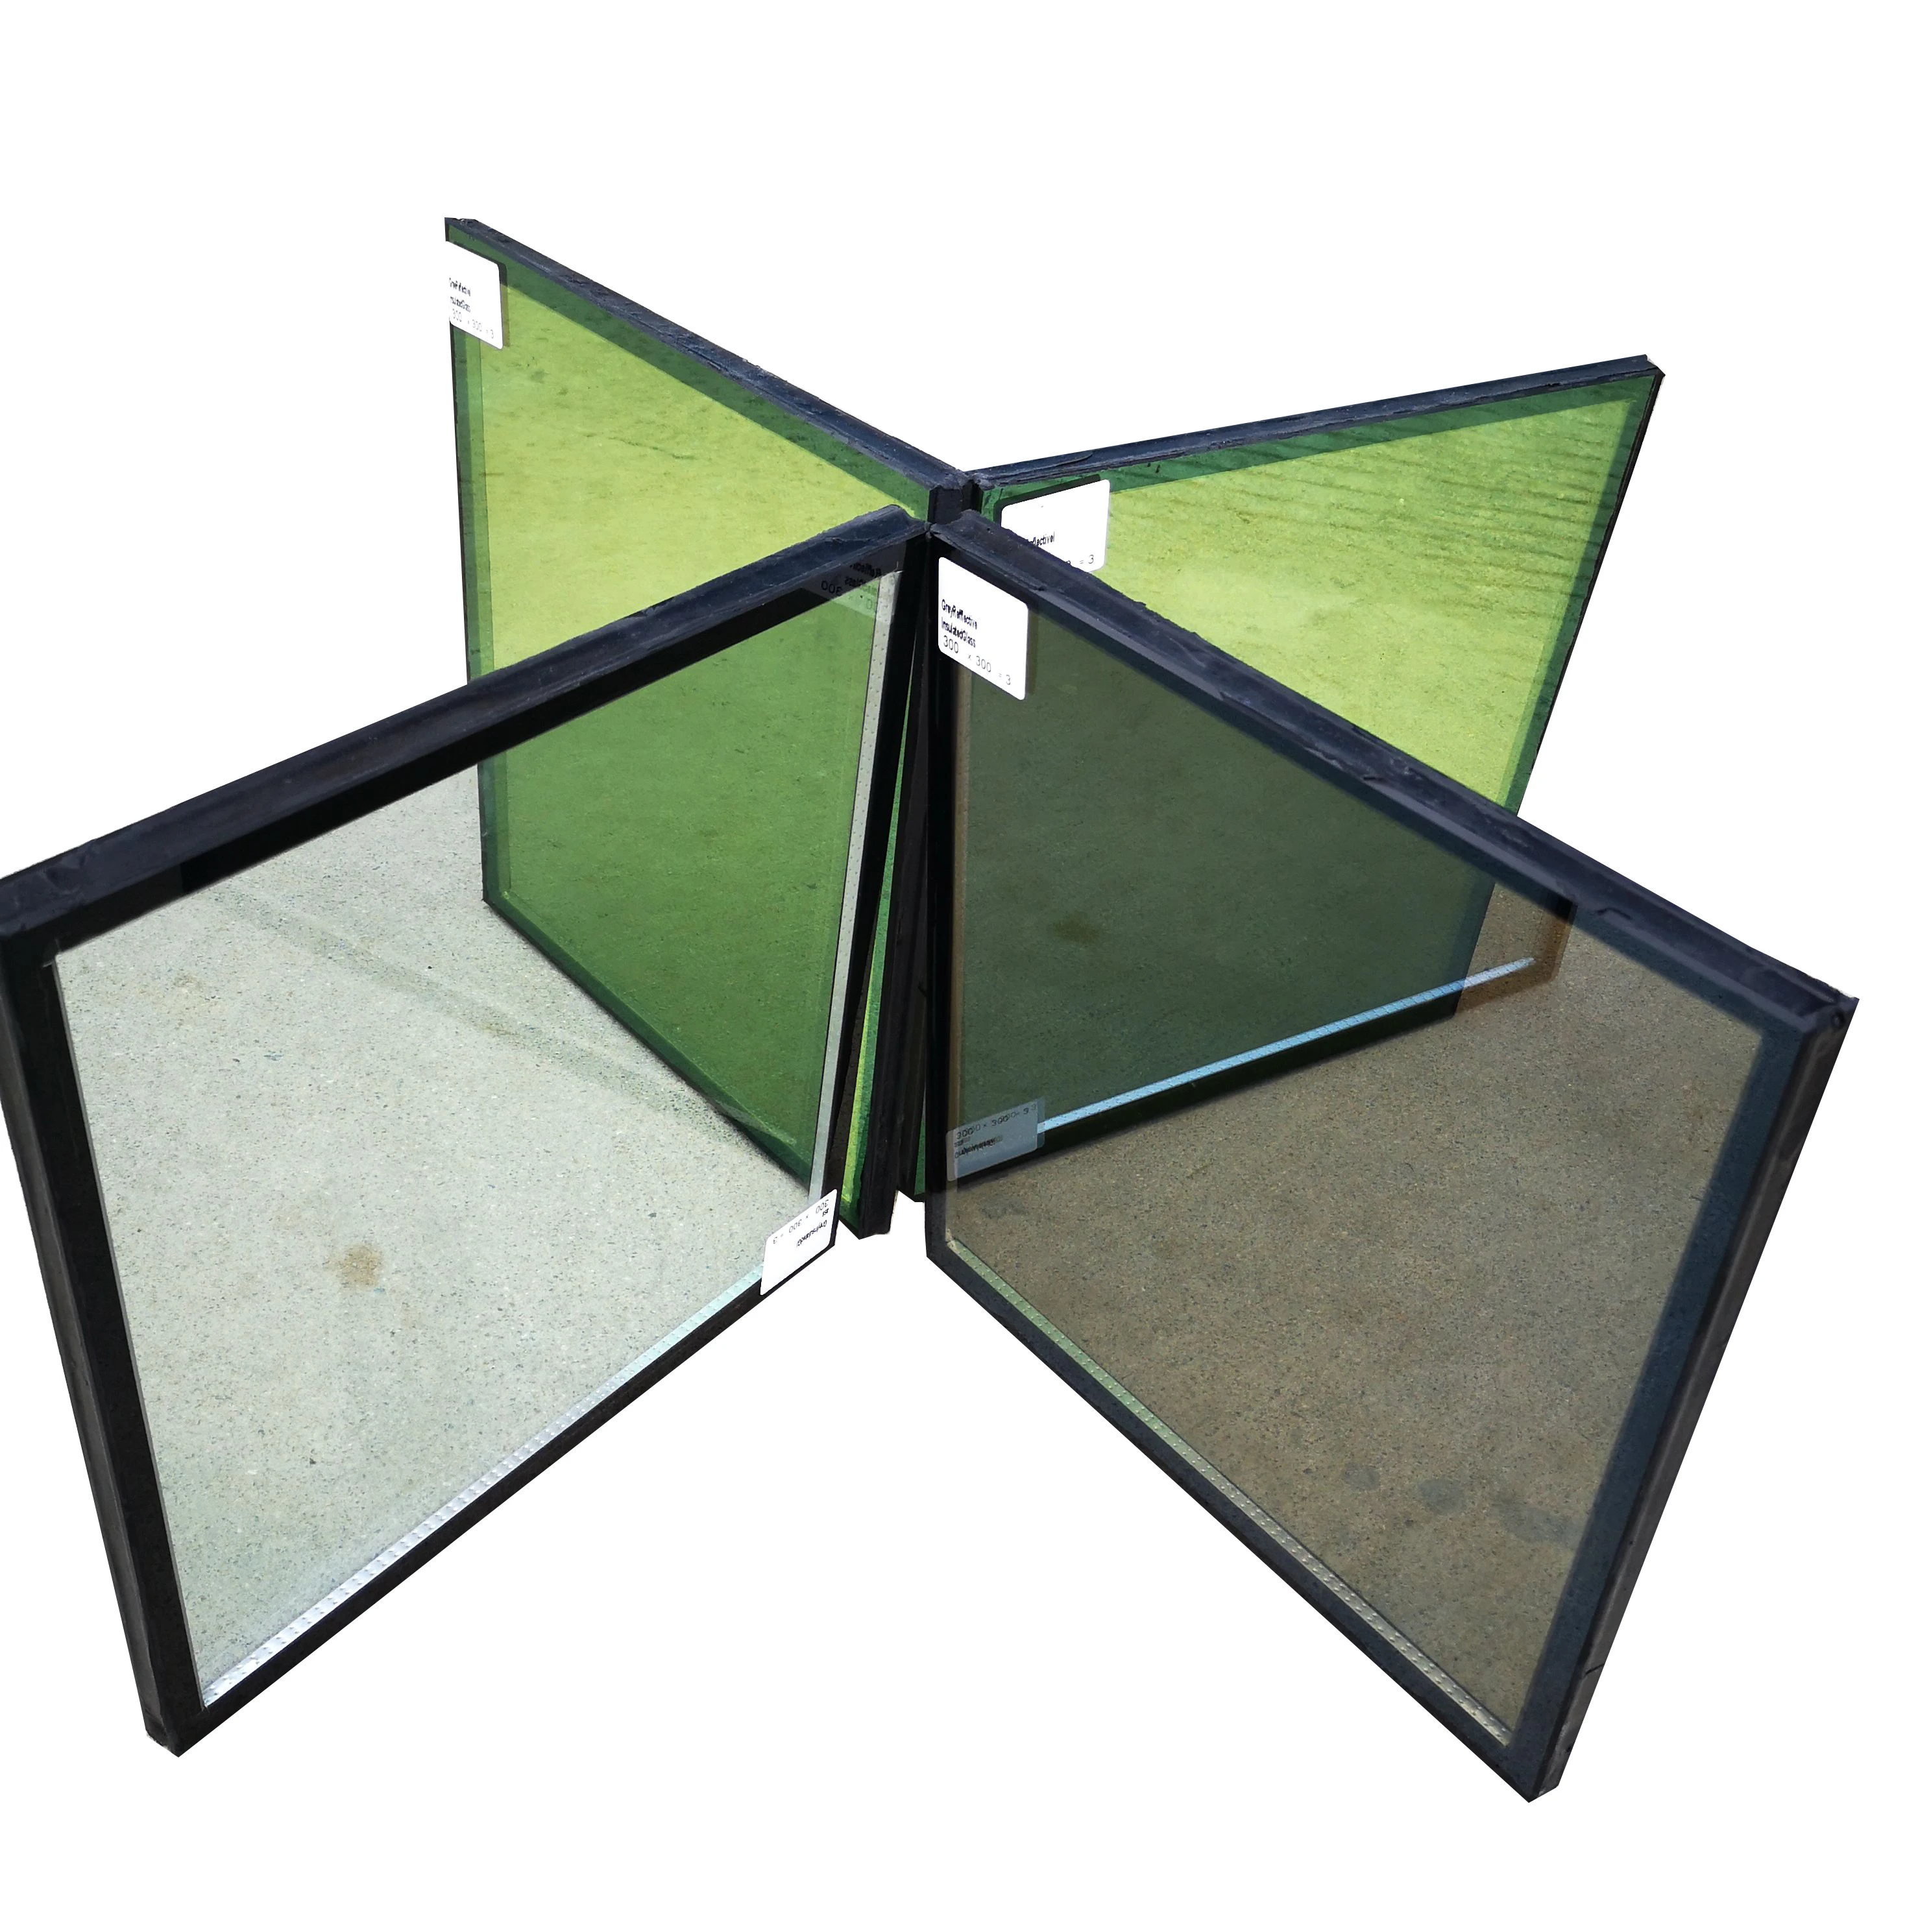 6mm+12A+6mm Double Glazing Decorative Insulated Glass